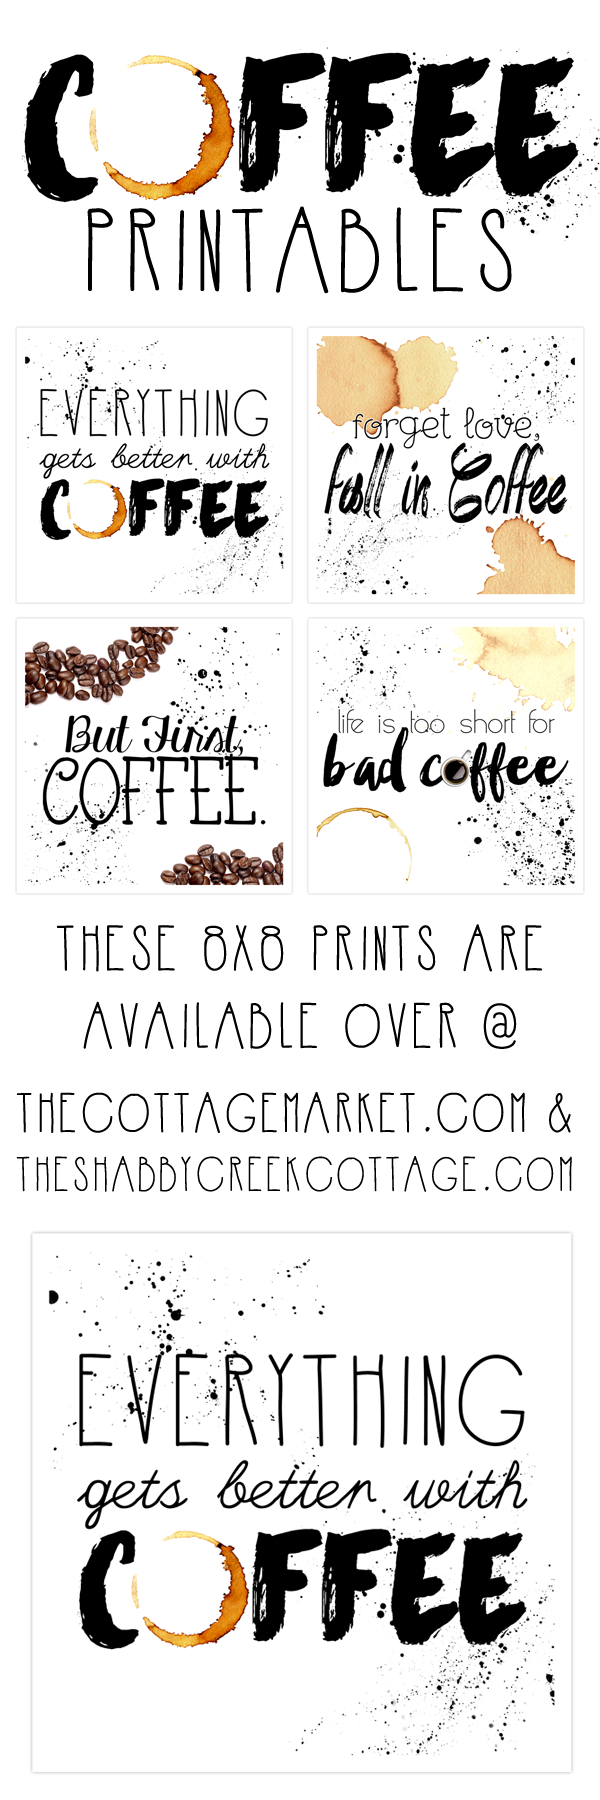 Free Printable Art: The Coffee Collection - The Cottage Market - Free Coffee Printable Art